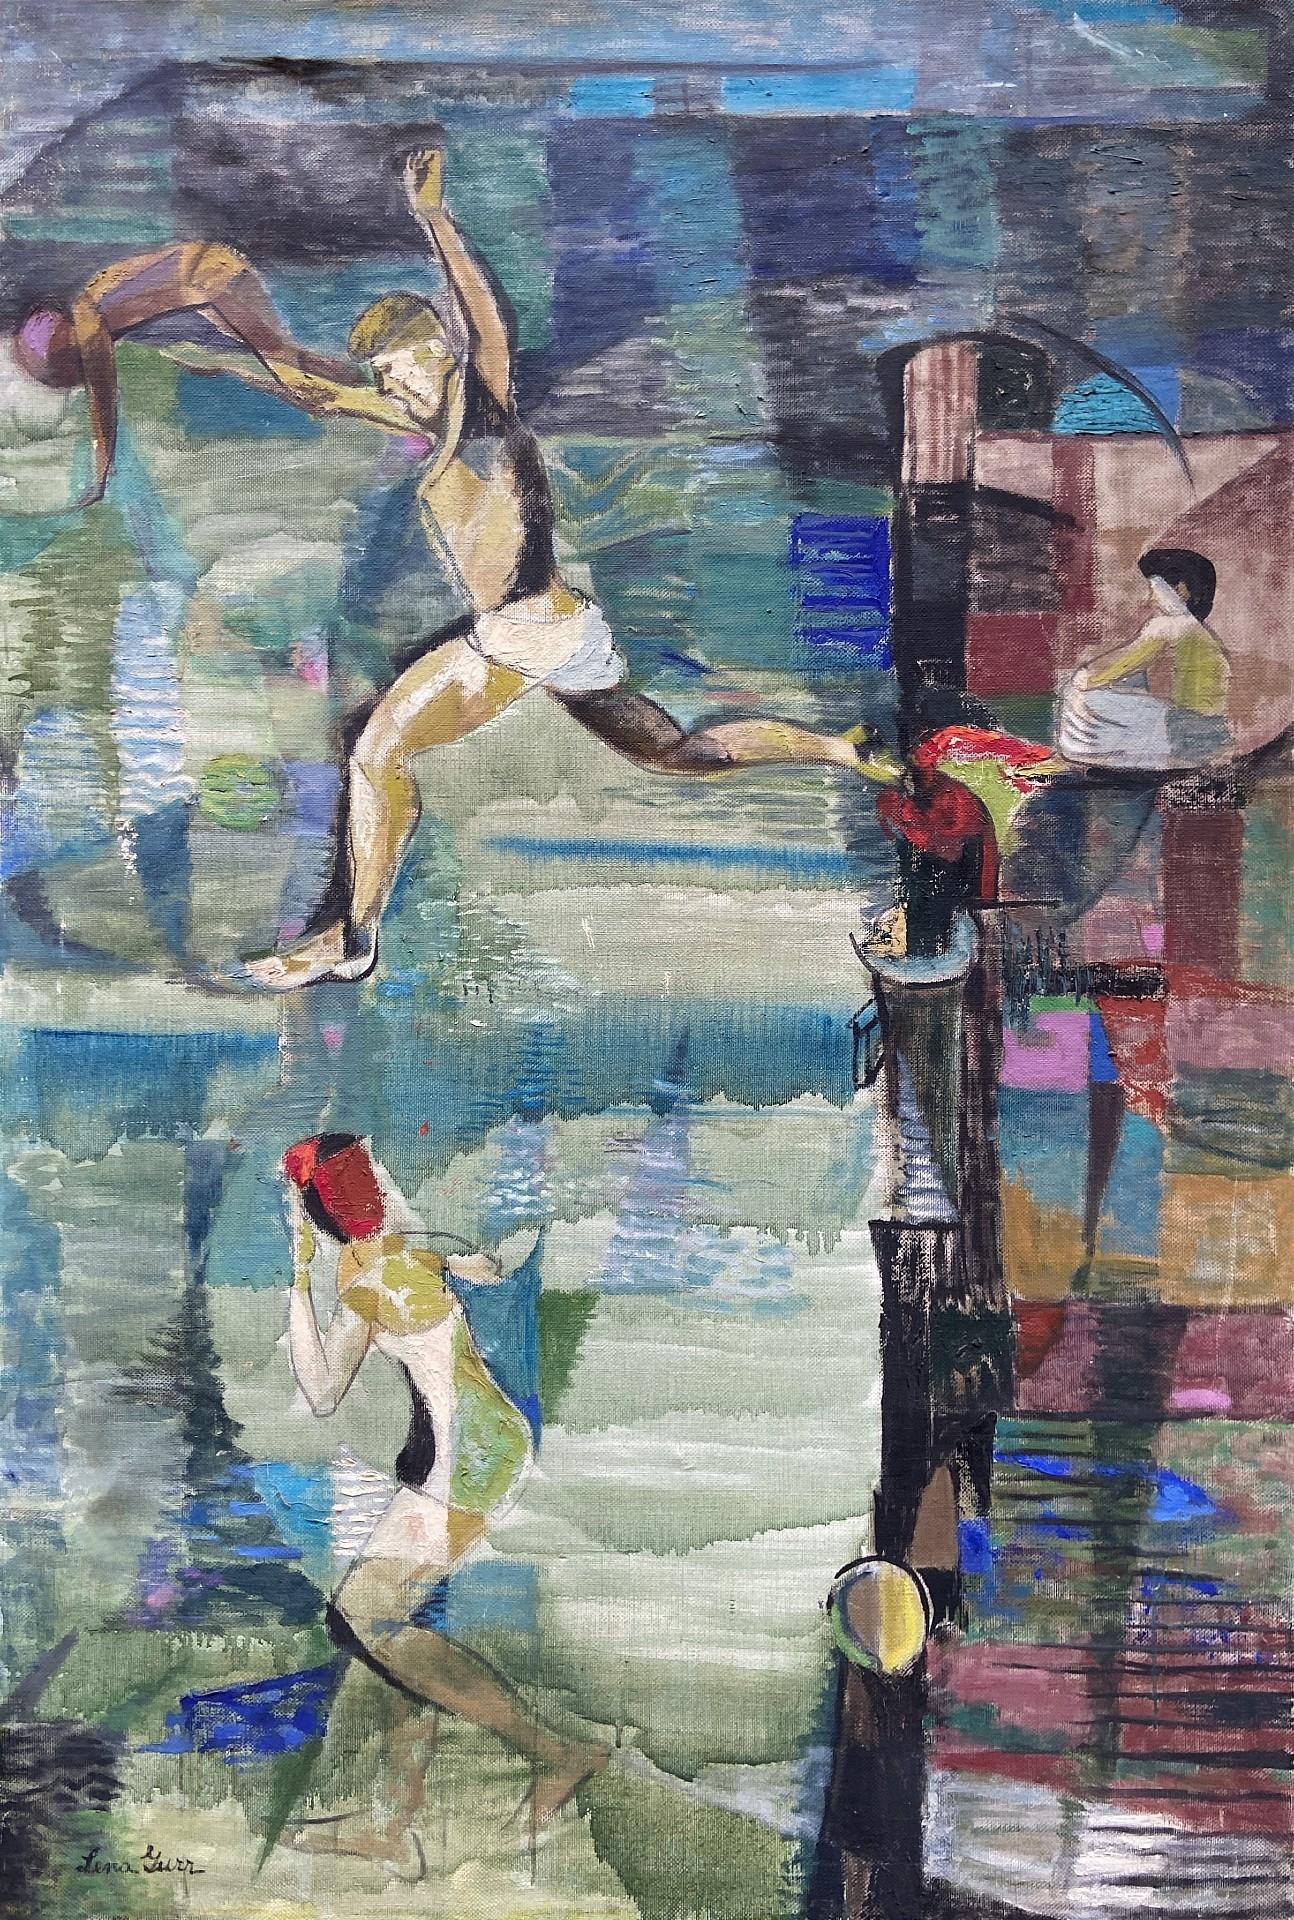 Lena Gurr Figurative Painting - Summer in the City, Large Semi-Abstract 20th Century Oil Painting, Female Artist